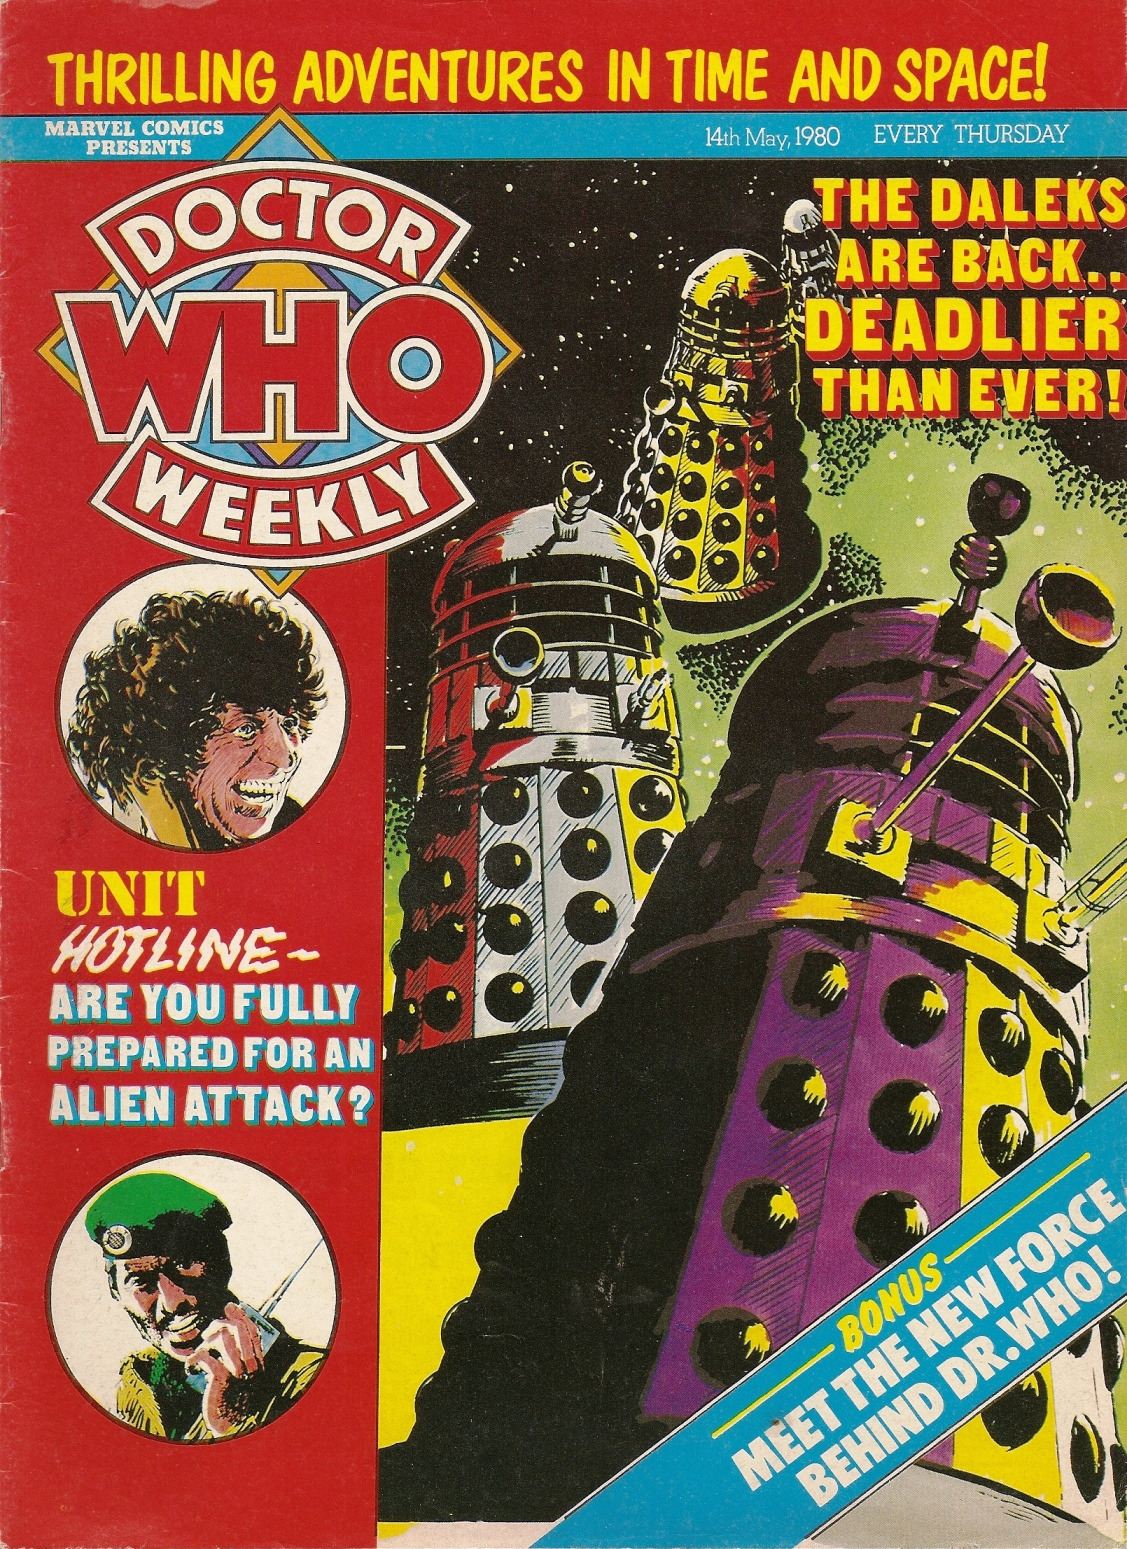 Doctor Who Weekly - Issue 31 - 14th May 1980